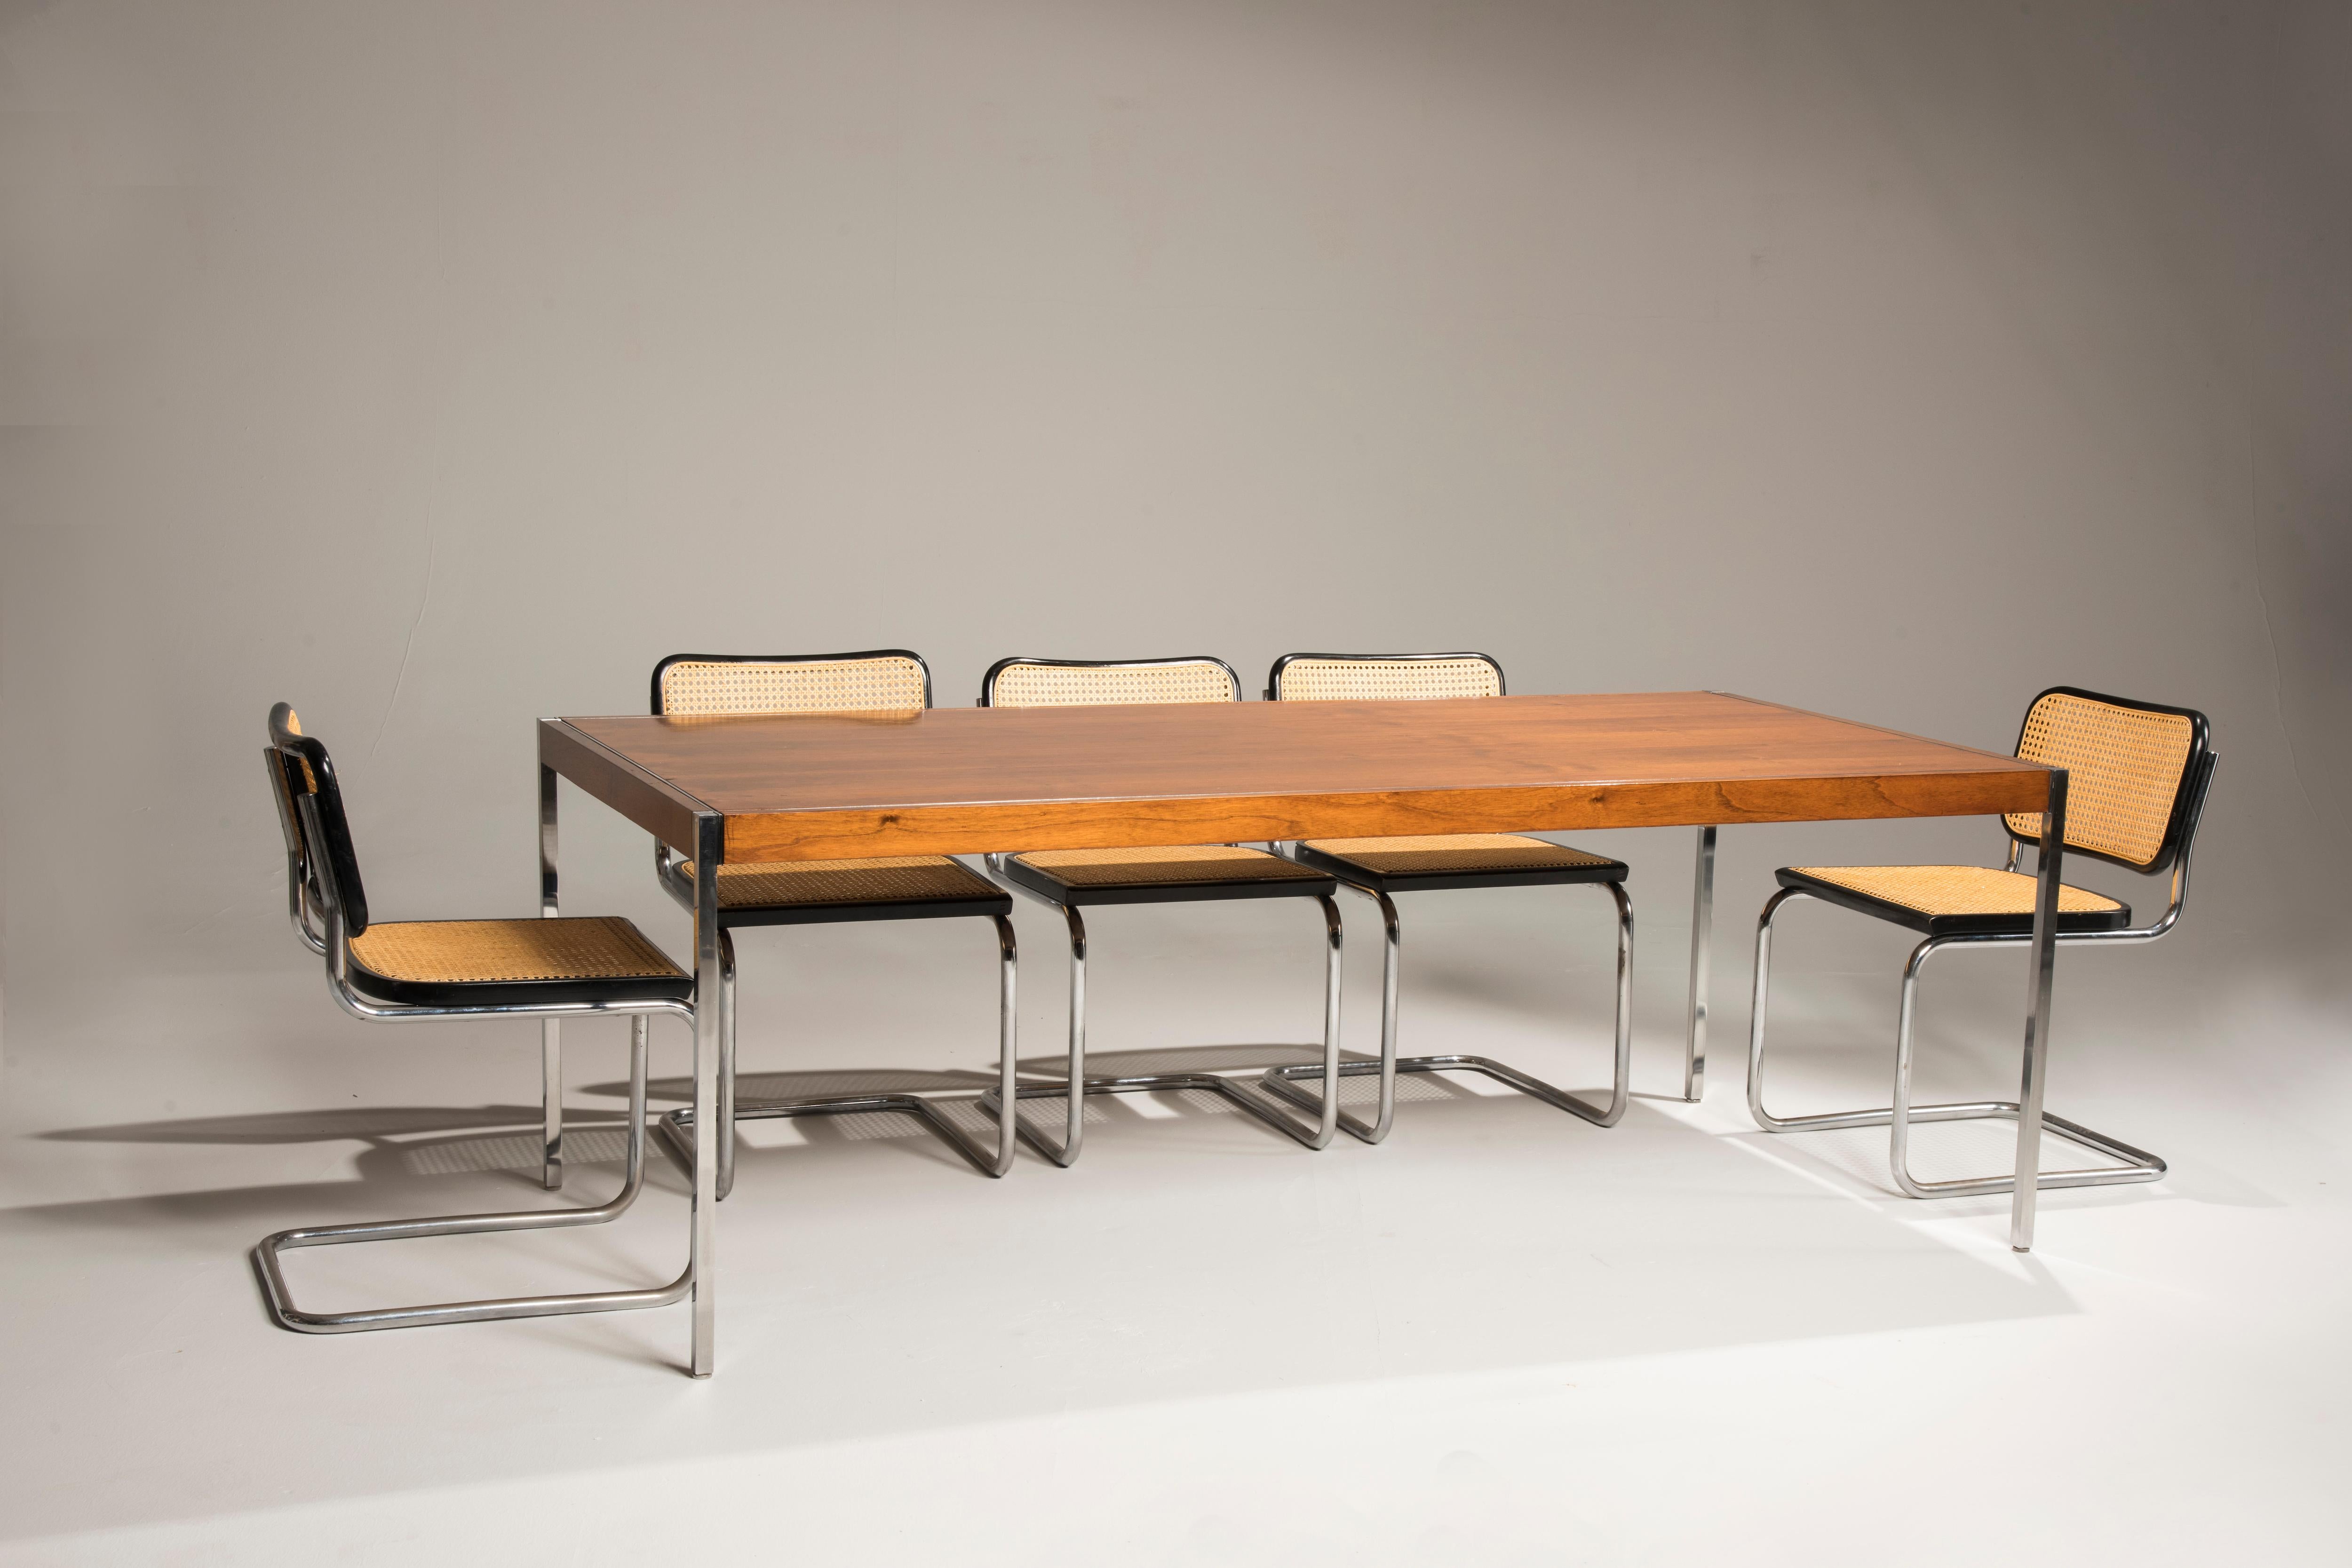 Bauhaus Marcel Breuer Cesca Chairs for Knoll Production, 18 Chairs Available 3